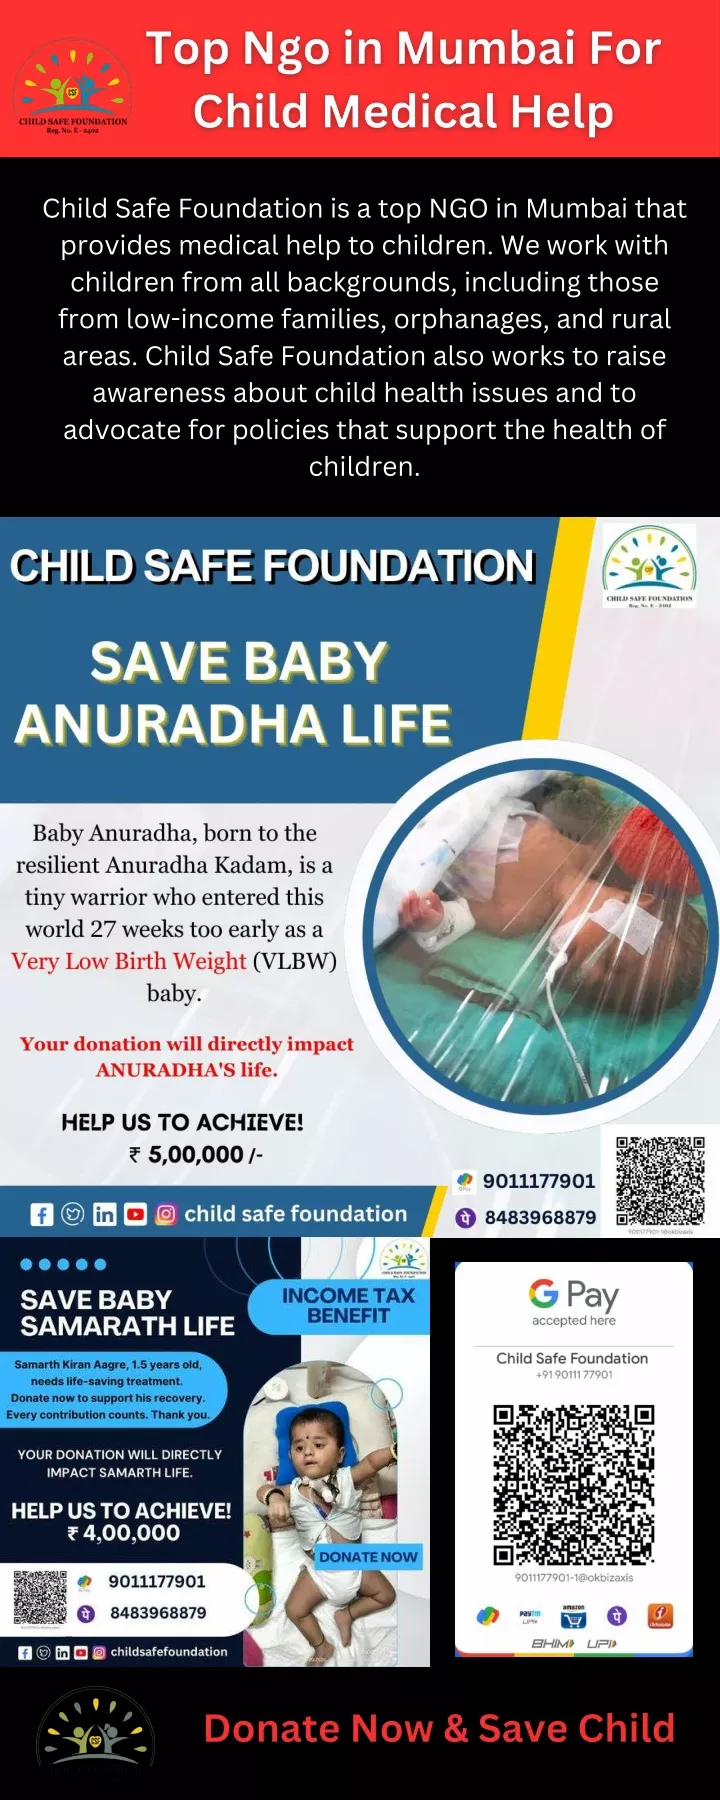 child safe foundation is a top ngo in mumbai that